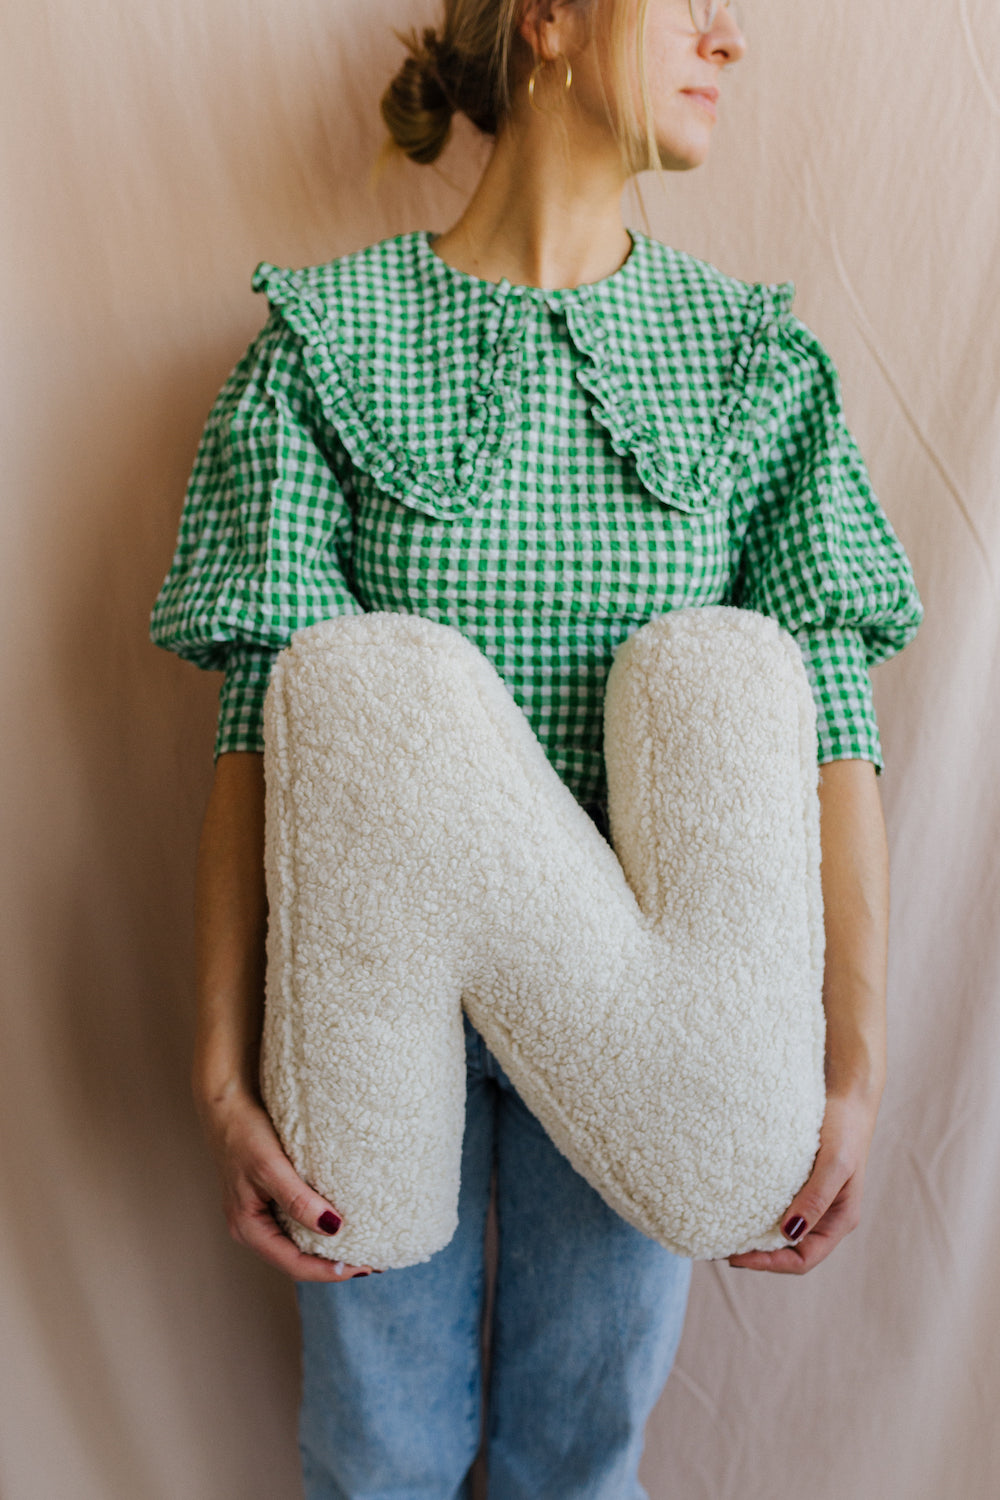 Boucle Letter cushion N by Bettys Home Teddy Letter Pillow held by woman in green shirt and jeans